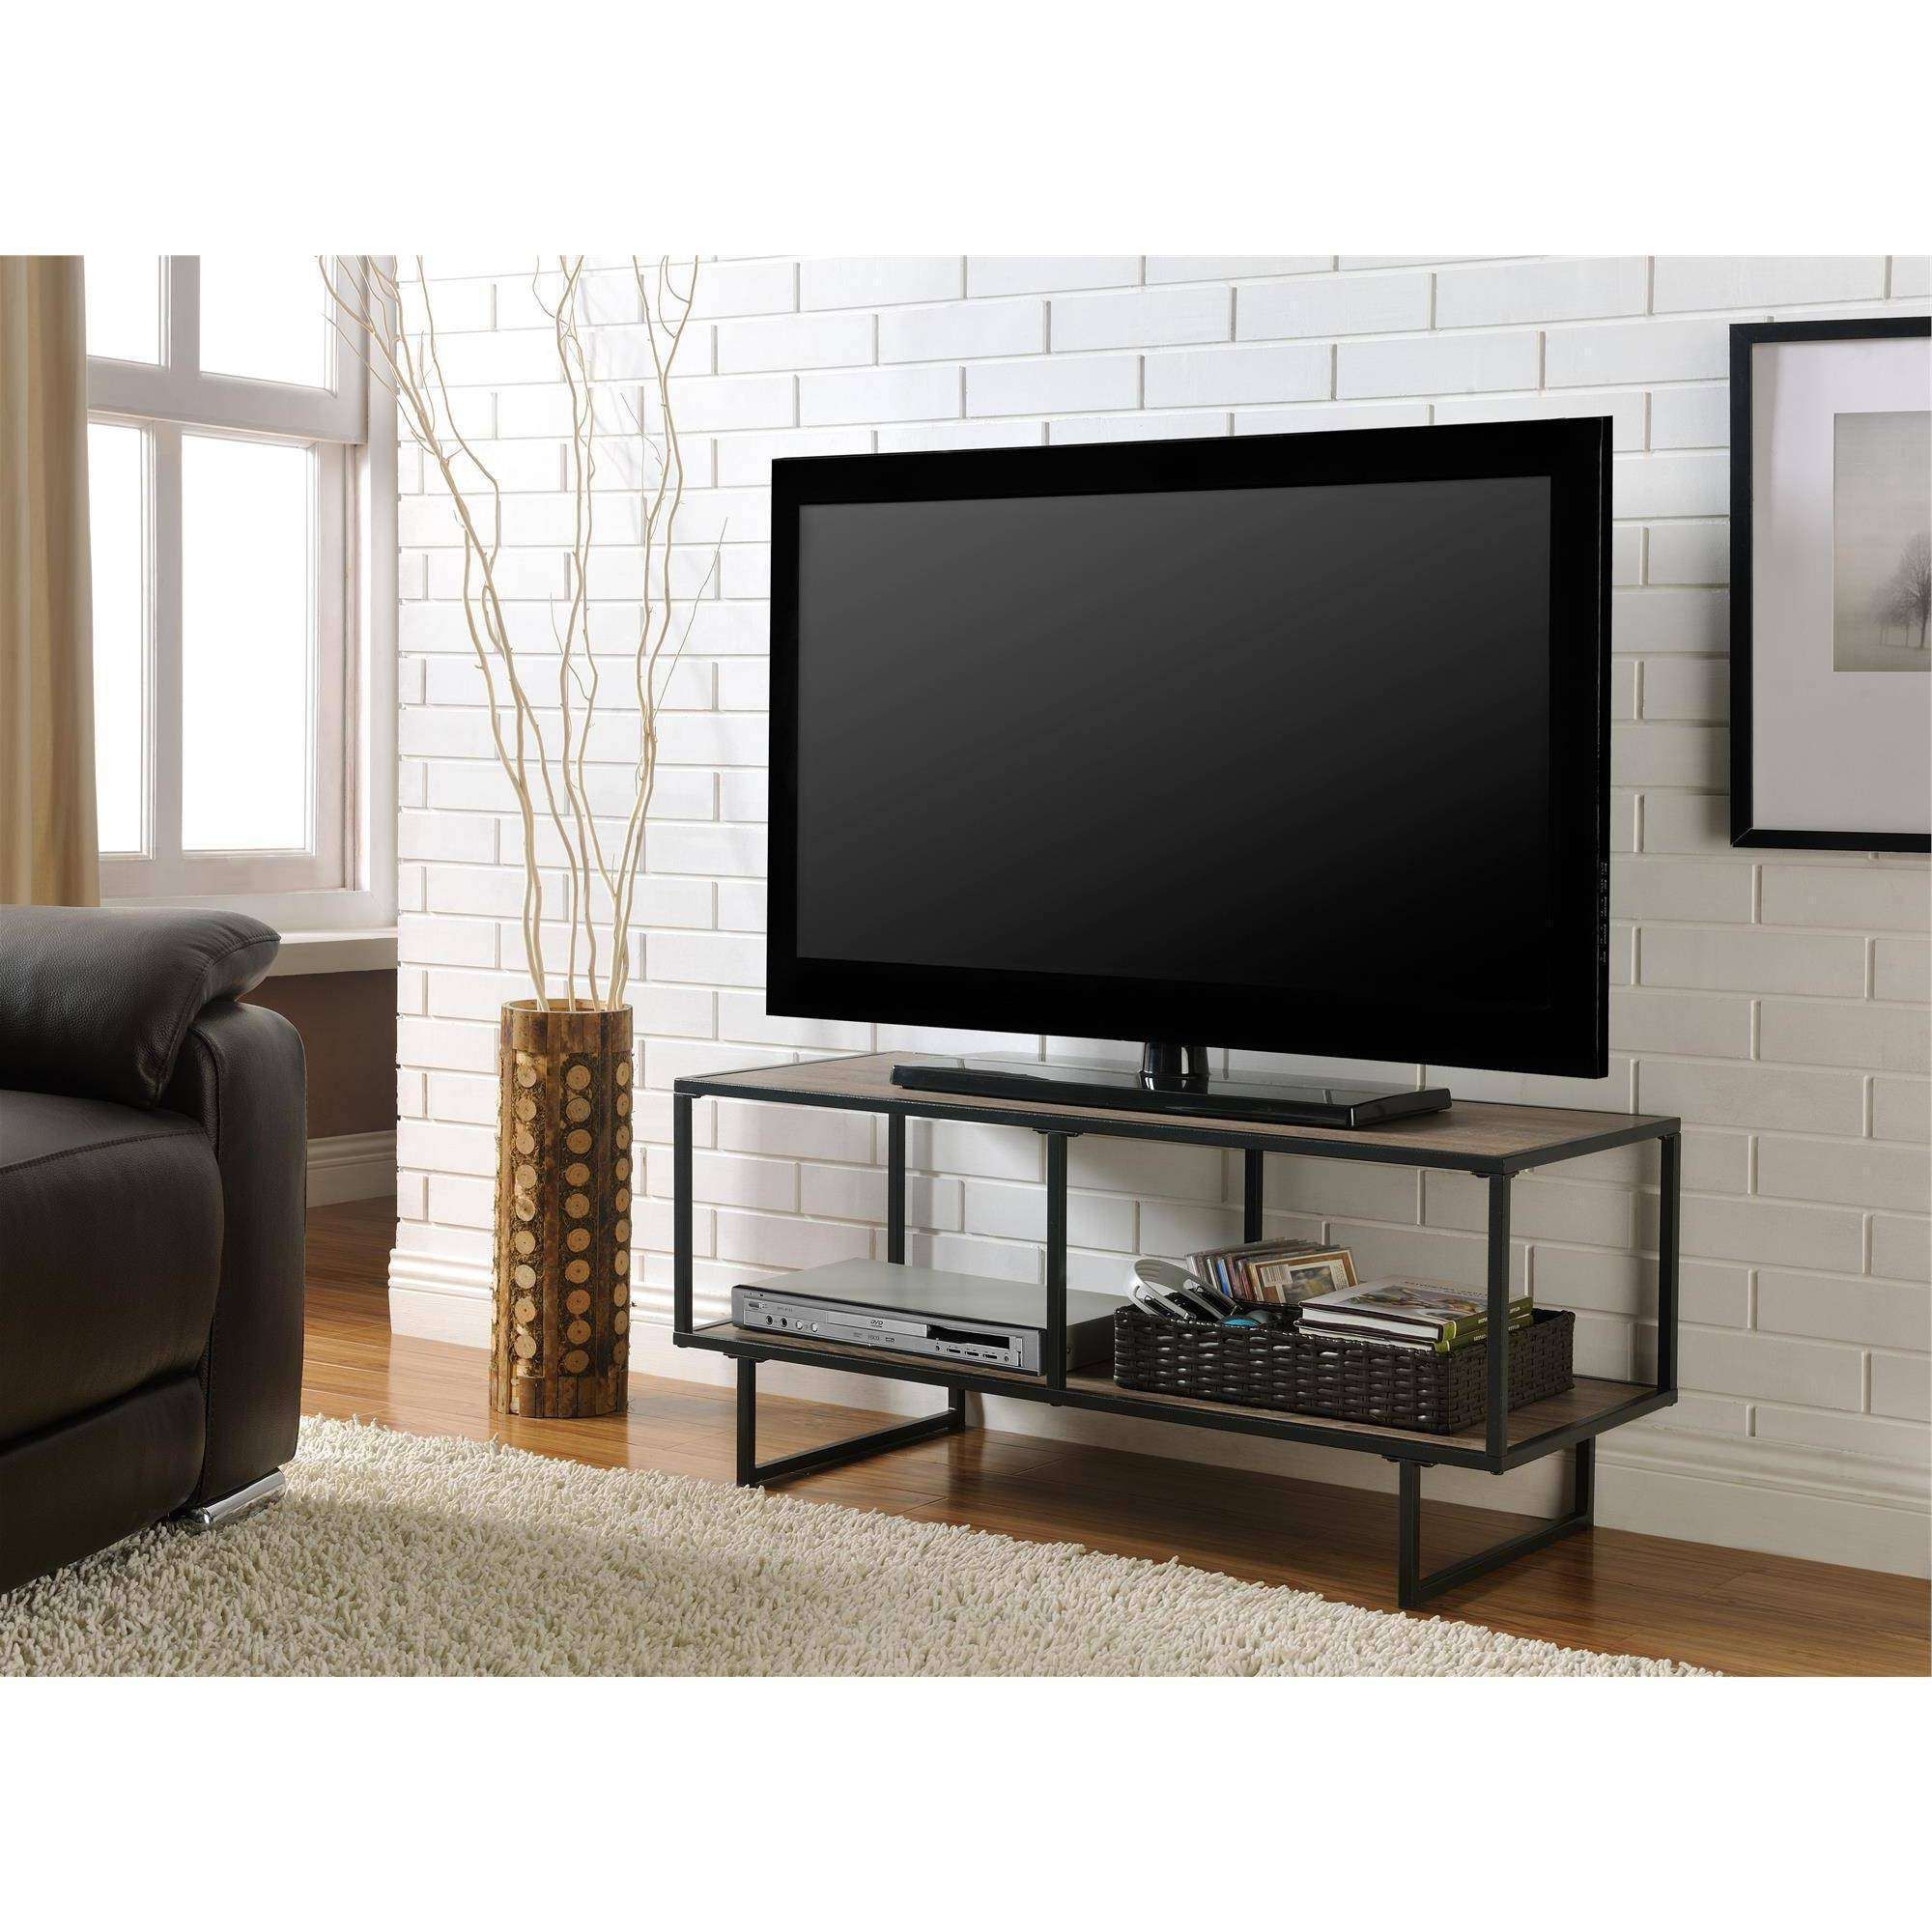 Altra Furniture Emmett 1 Shelf Tv Stand Coffee Table In Sonoma Oak Regarding Fashionable Tv Cabinet And Coffee Table Sets (View 12 of 20)